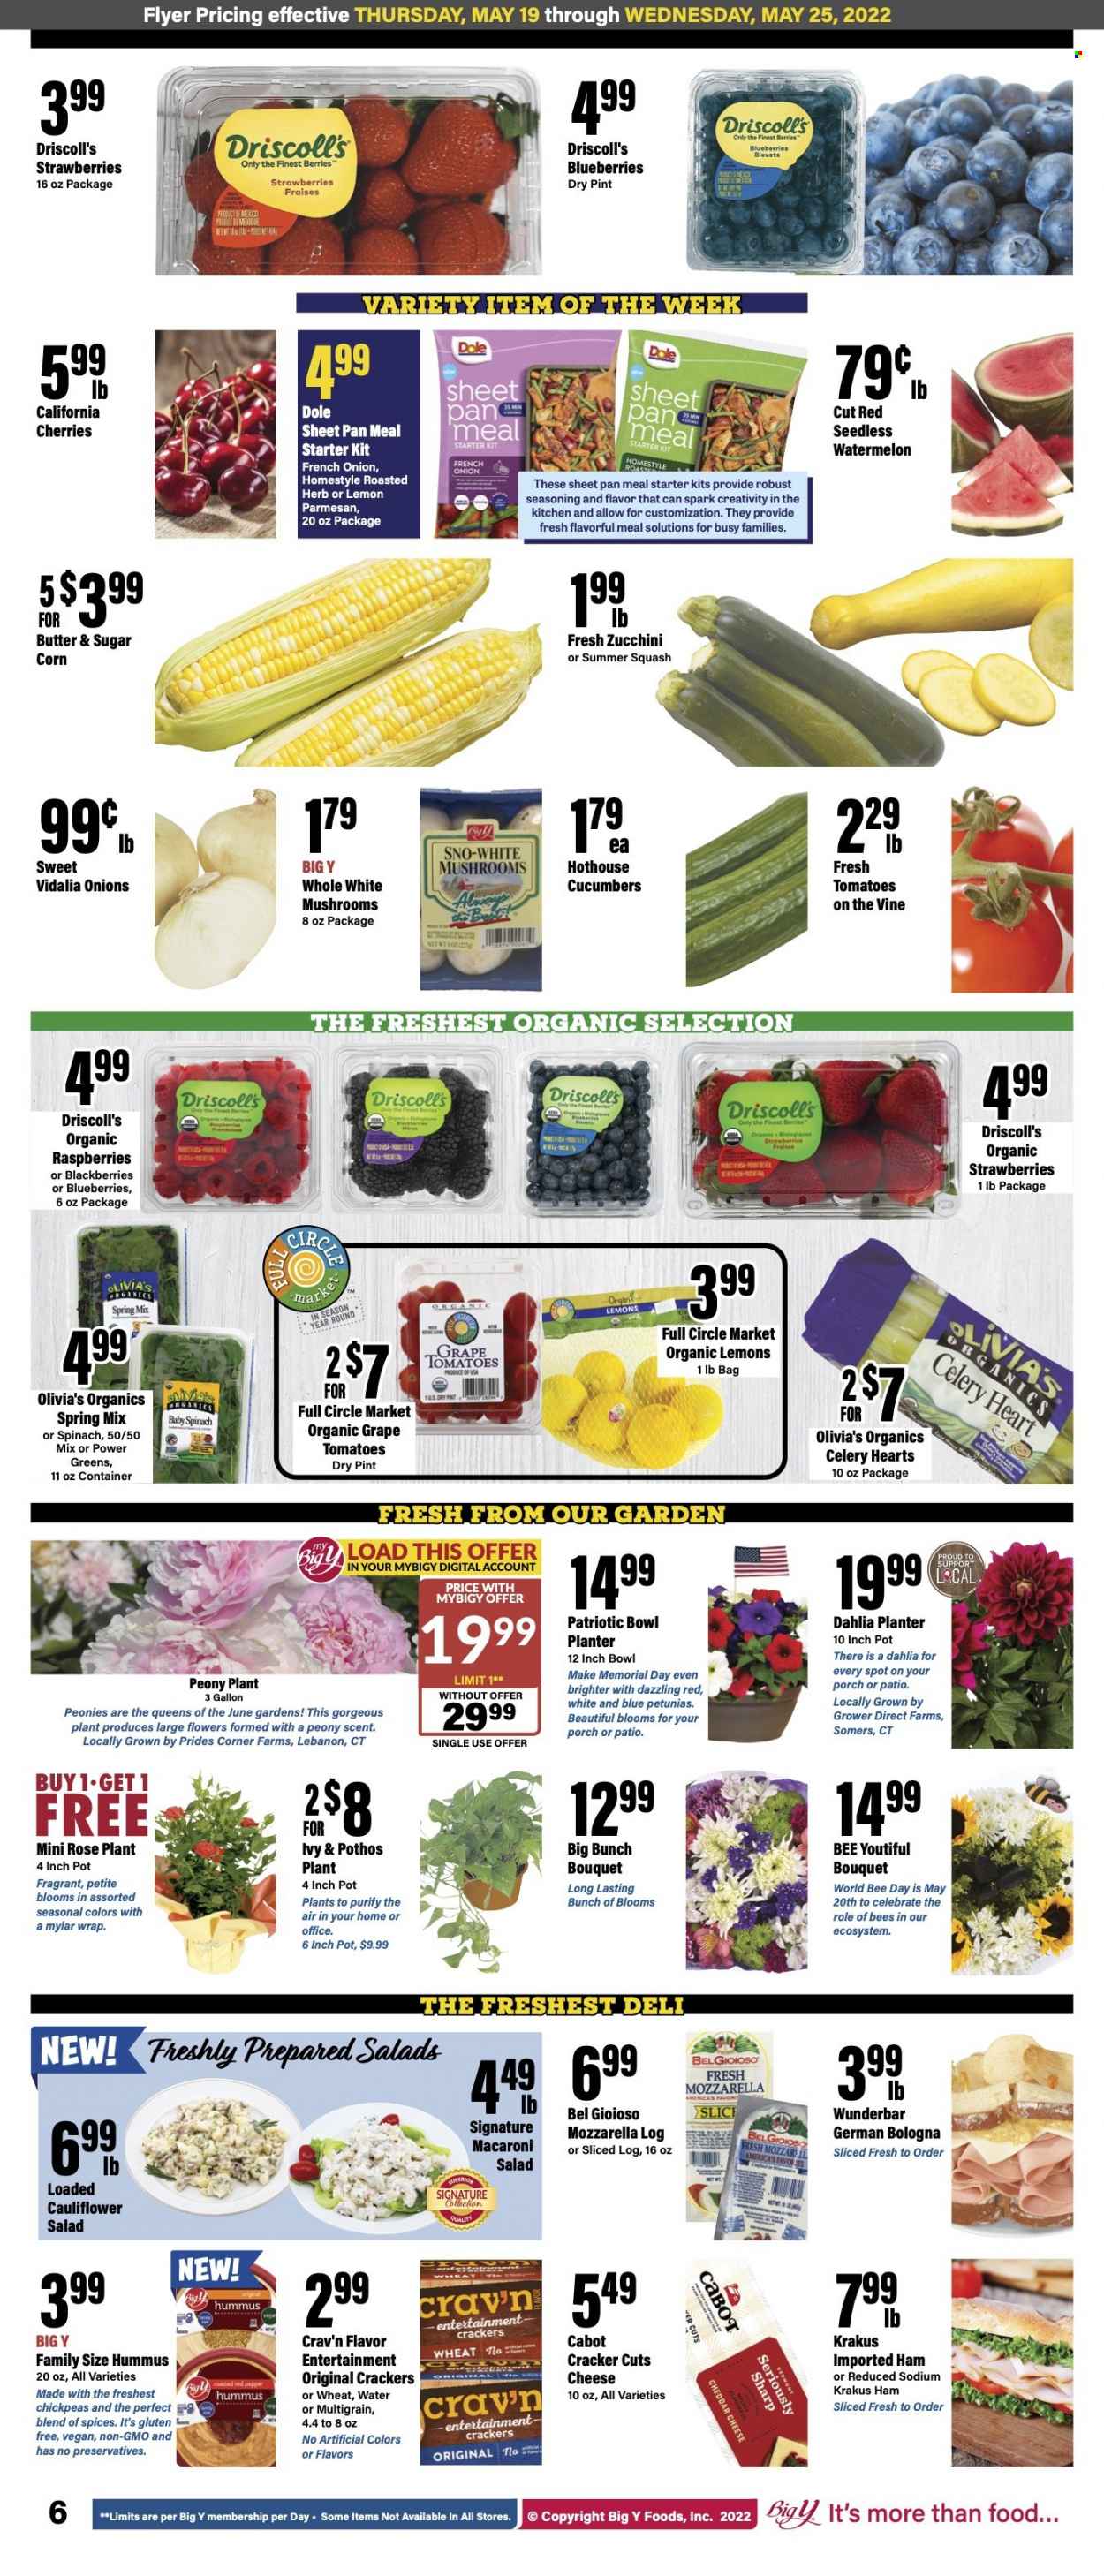 thumbnail - Big Y Flyer - 05/19/2022 - 05/25/2022 - Sales products - mushrooms, celery, corn, cucumber, spinach, tomatoes, zucchini, onion, salad, Dole, sleeved celery, blackberries, blueberries, strawberries, watermelon, cherries, macaroni, ham, german bologna, hummus, mozzarella, cheddar, parmesan, cheese, butter, crackers, chickpeas, spice, wine, rosé wine. Page 7.